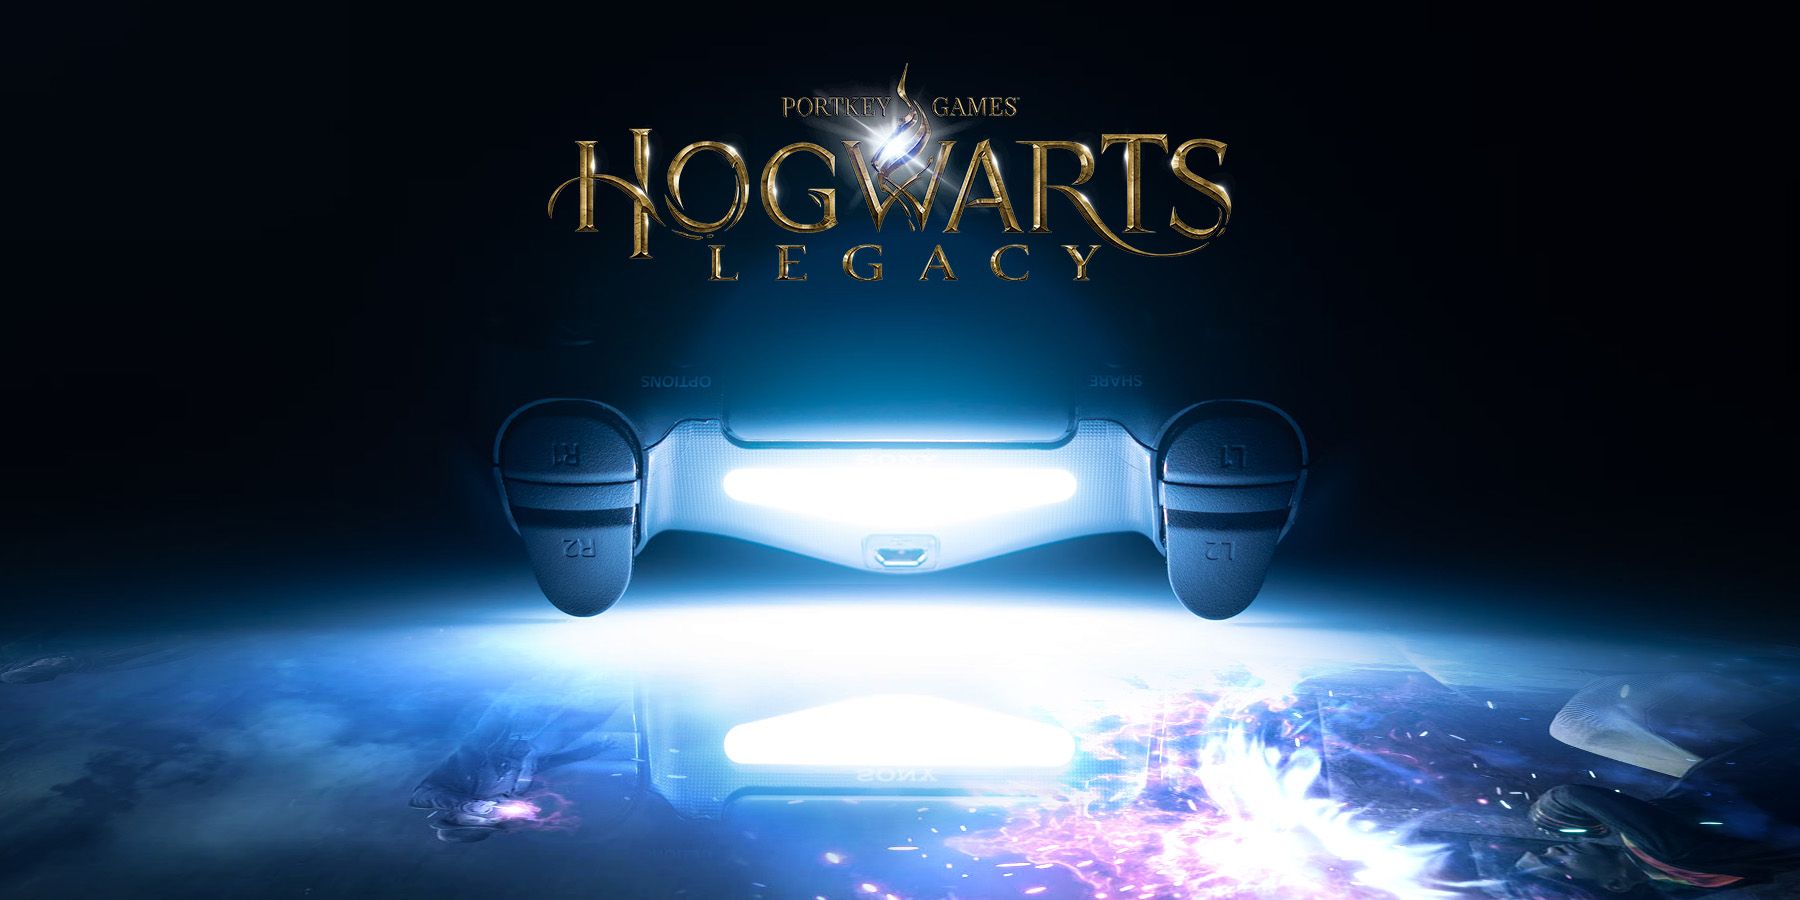 hogwarts legacy ps5 controller price